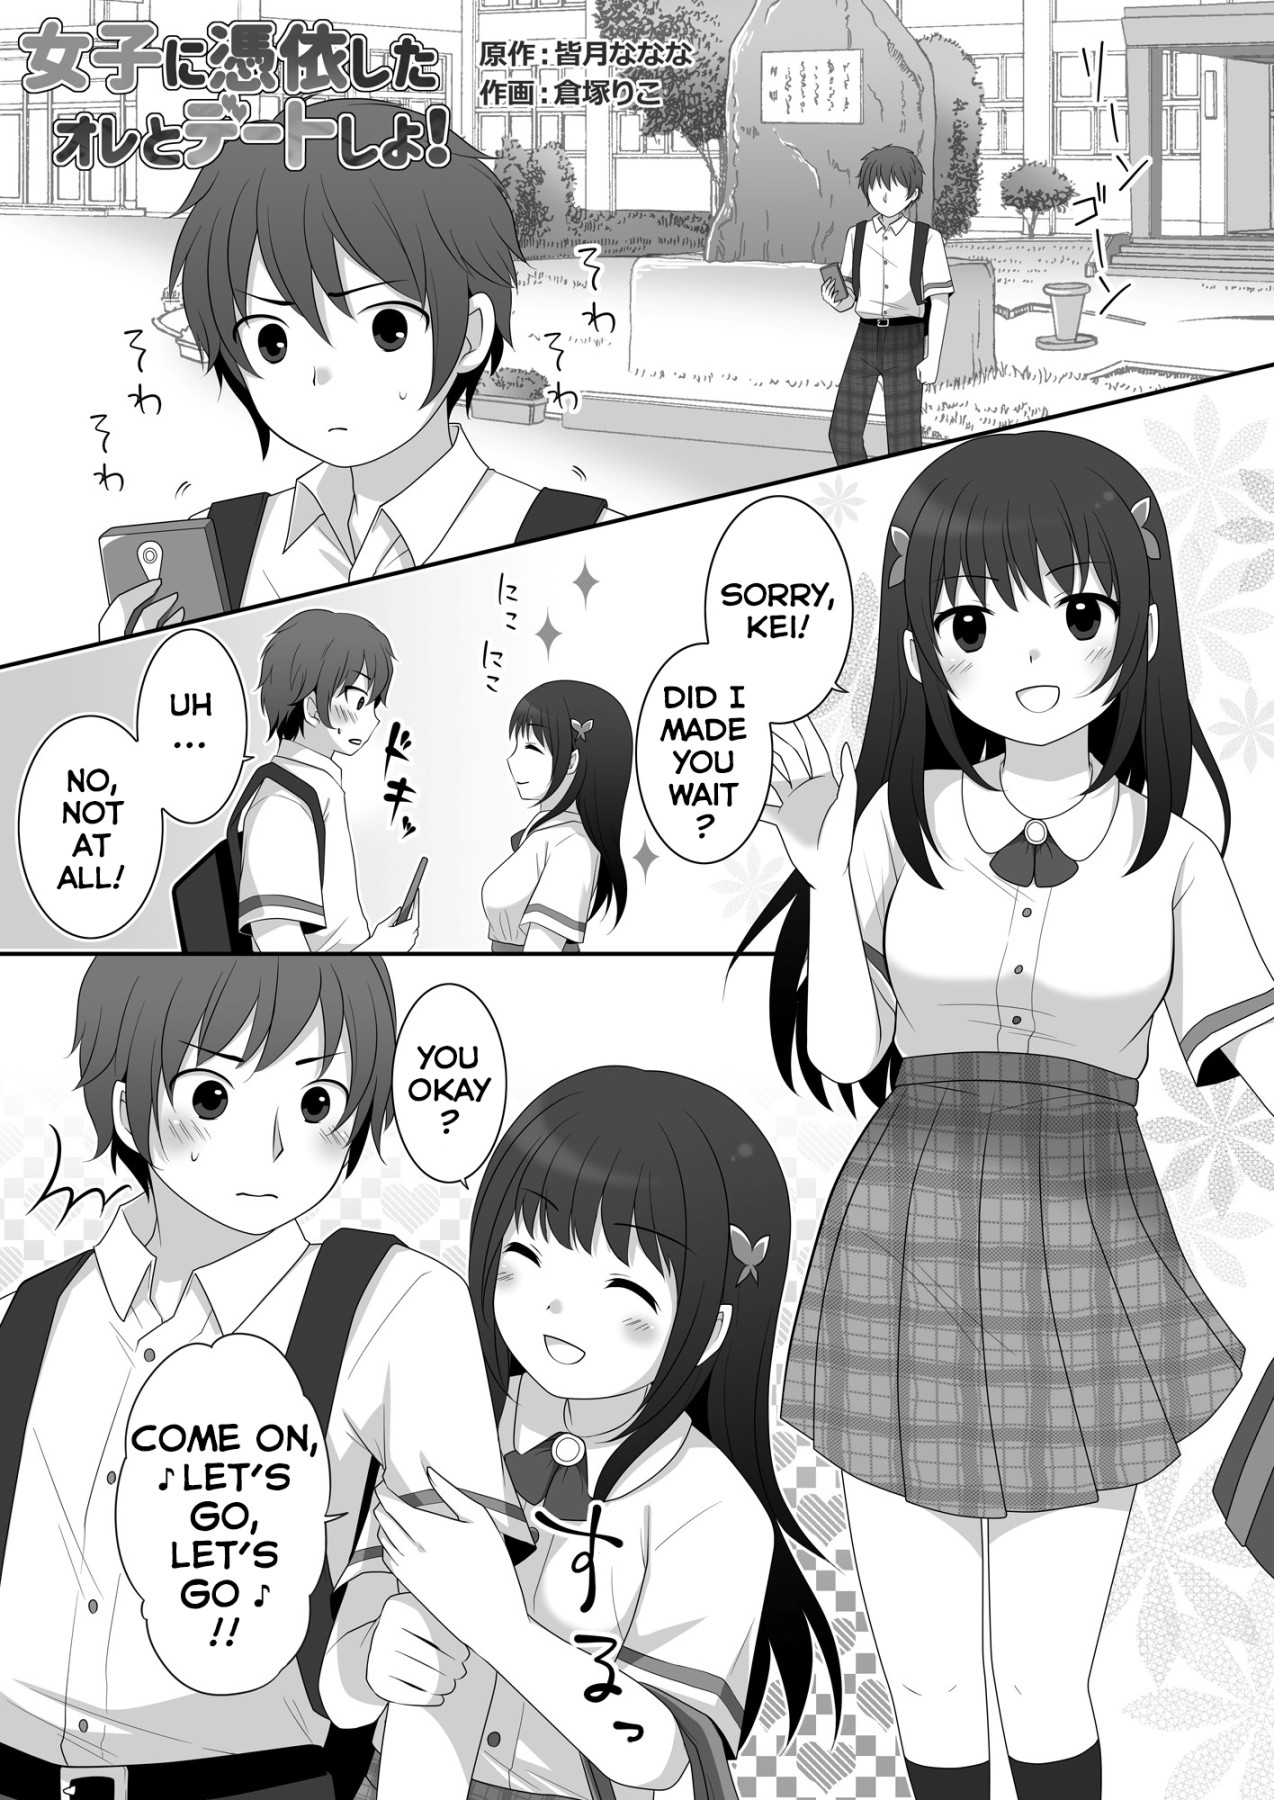 Hentai Manga Comic-I Posessed a Girl So Let's Go On a Date!-Read-2